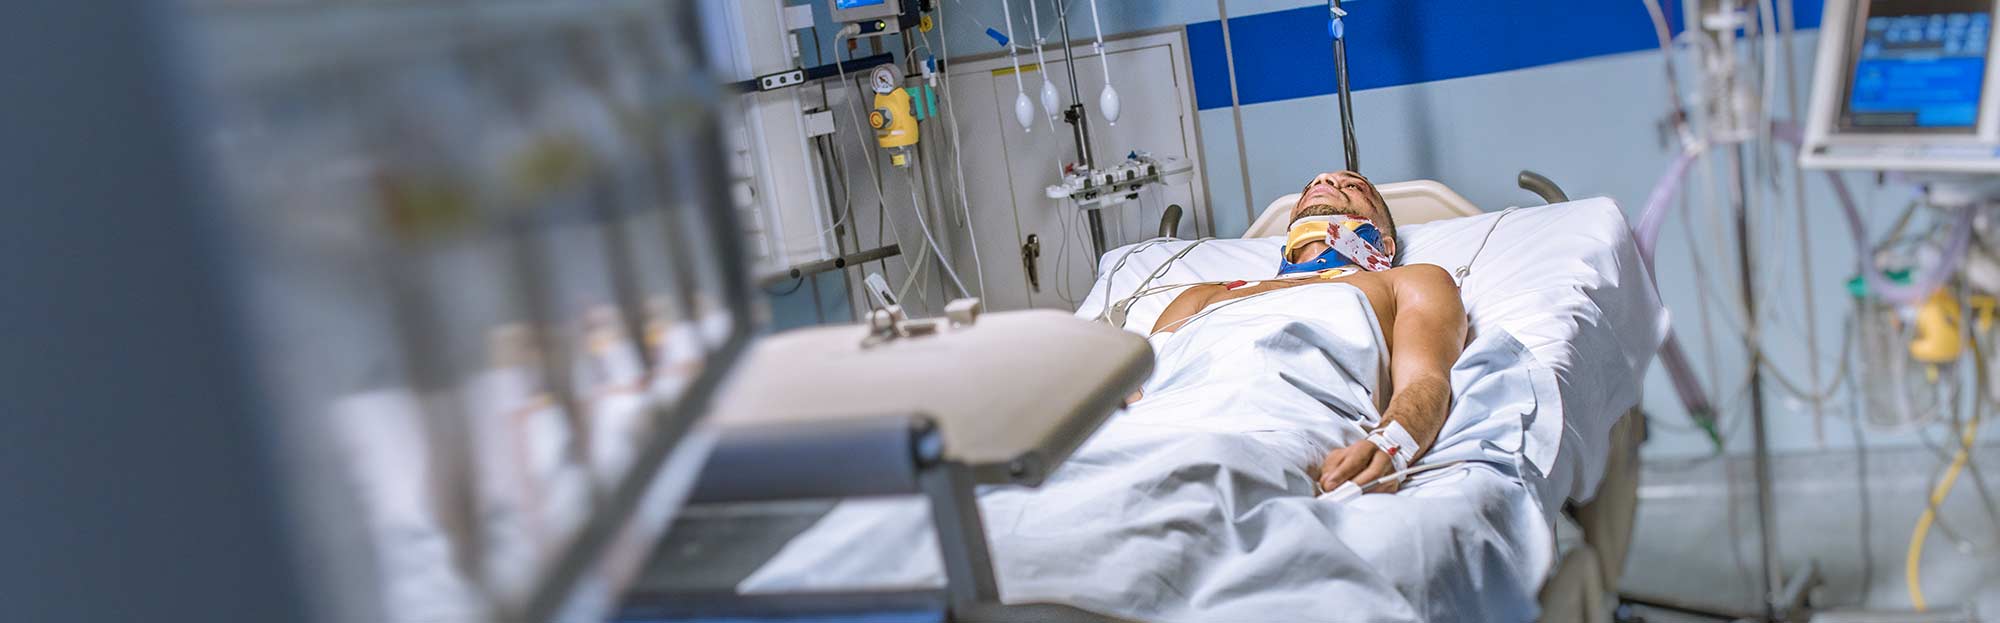 Person lies in hospital bed after being heavily injured in a car accident.